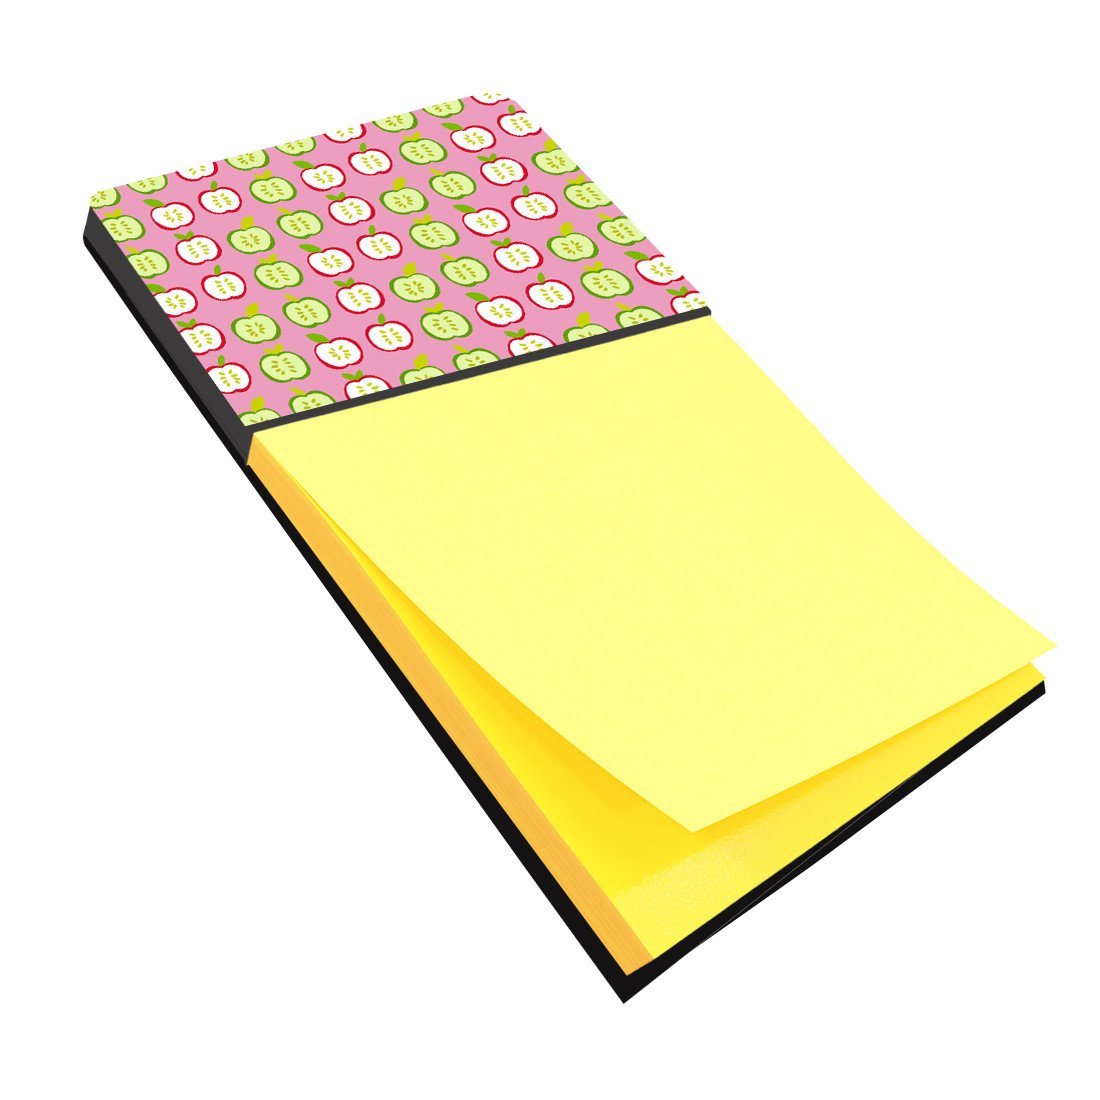 Apples on Pink Sticky Note Holder BB5141SN by Caroline's Treasures